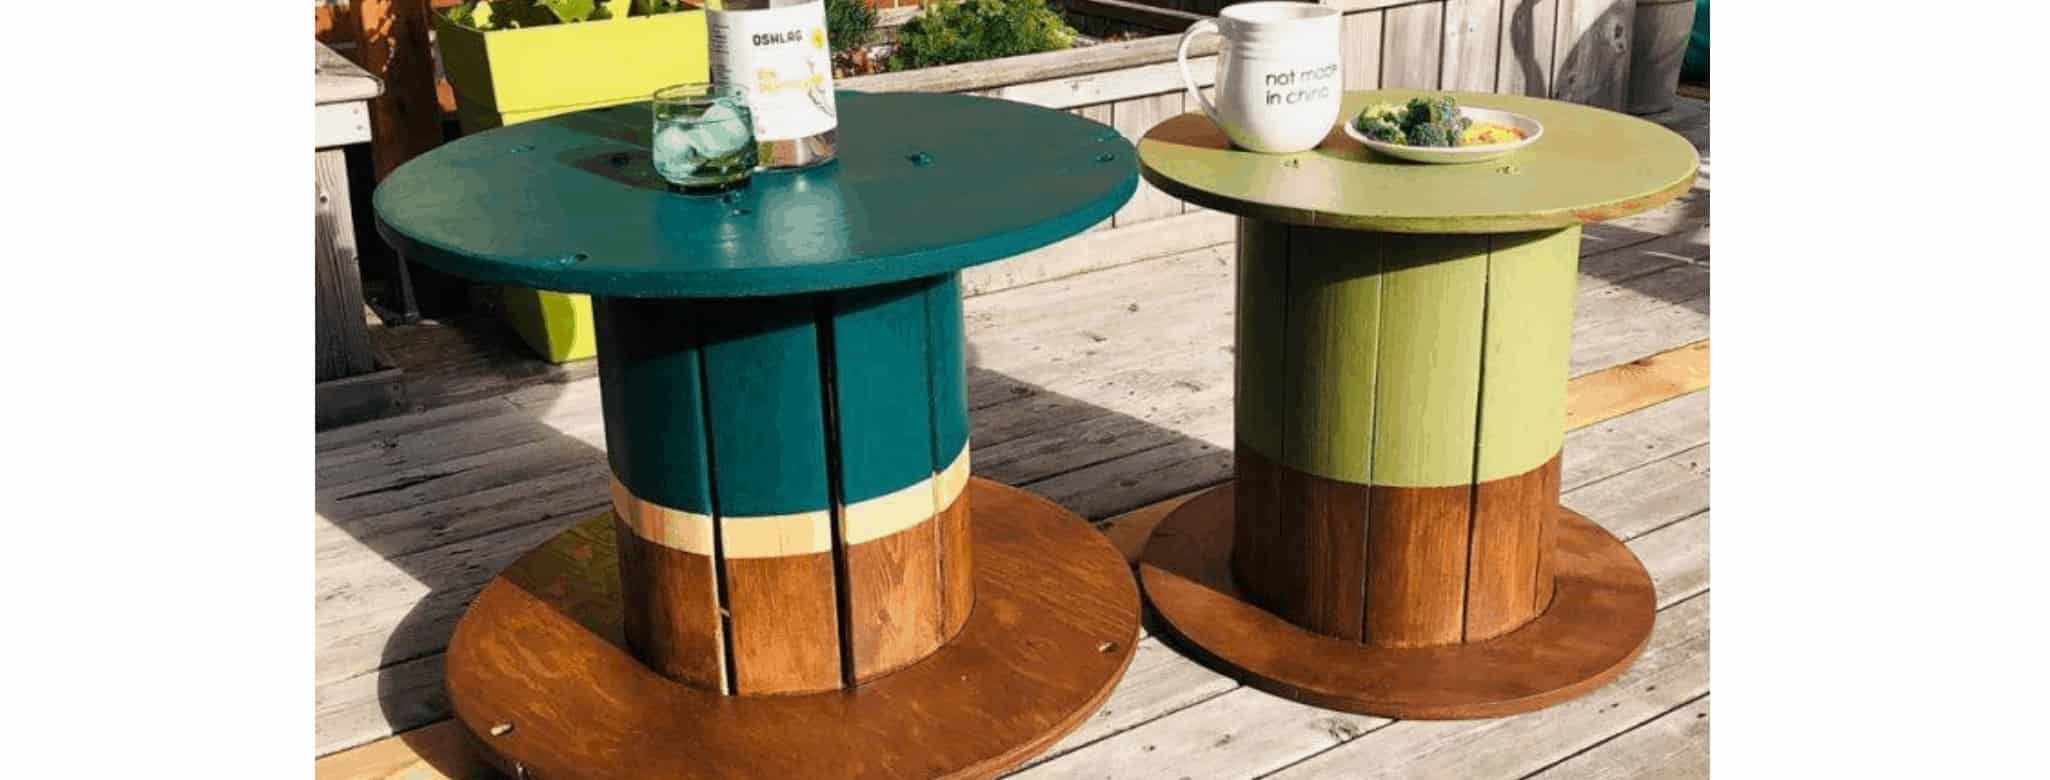 Weathered wooden spool used as side table.  Large wooden spools, Spool  furniture, Wooden spool tables